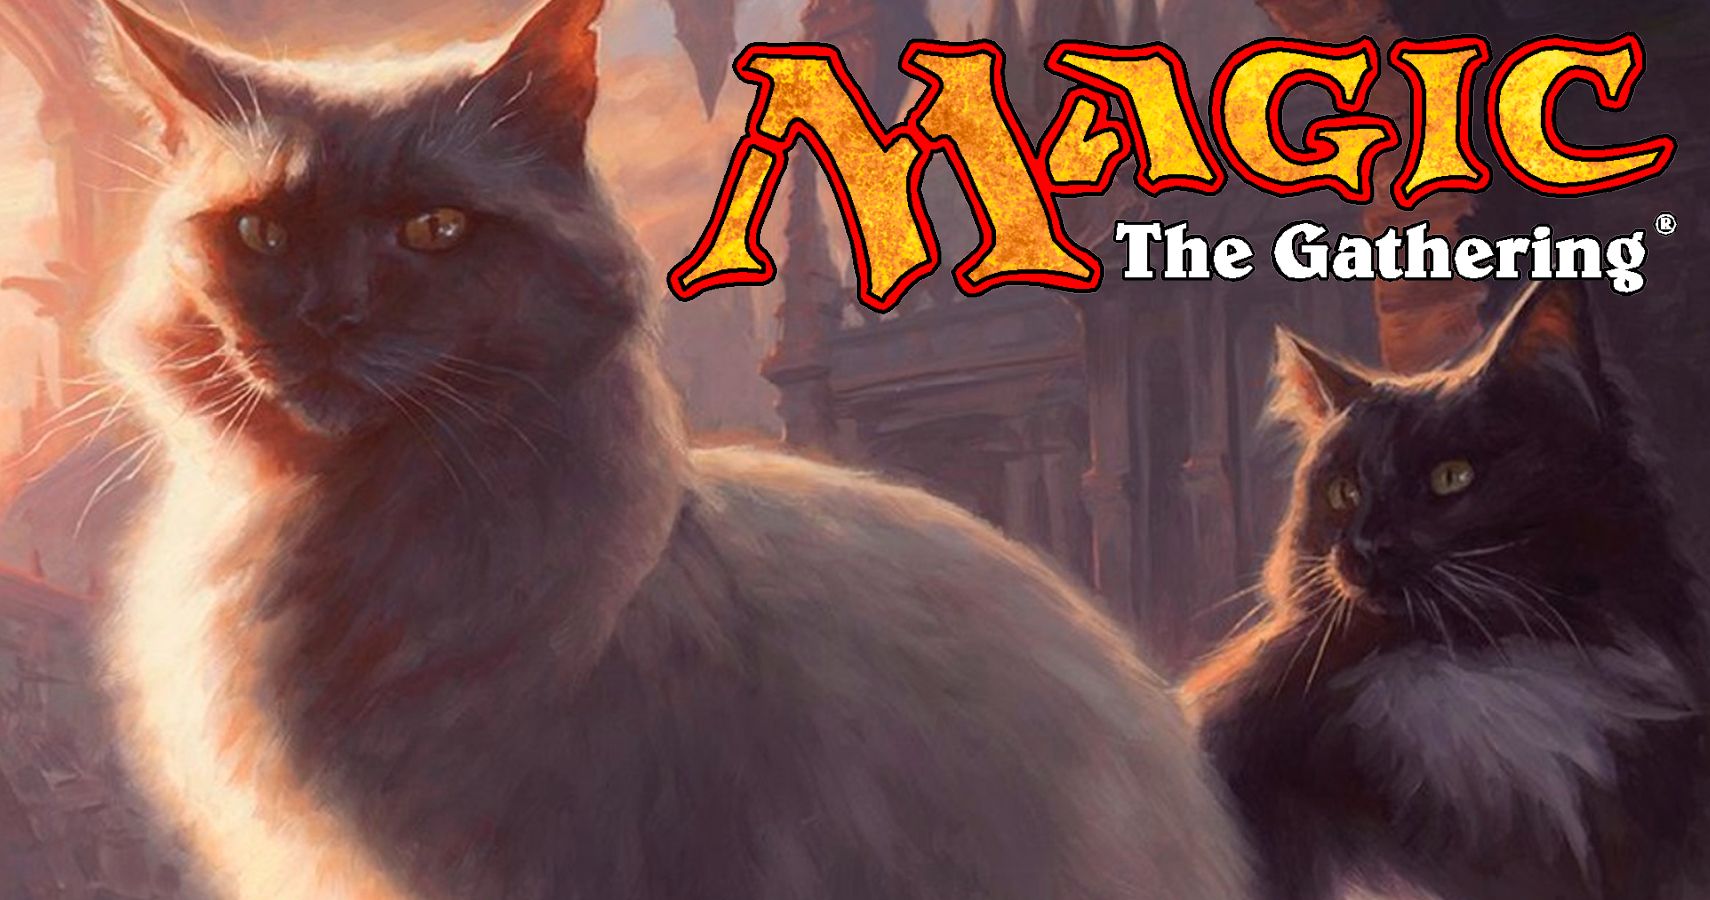 Magic The Gathering Artist Honors Beloved Deceased Cat In Latest Card Art